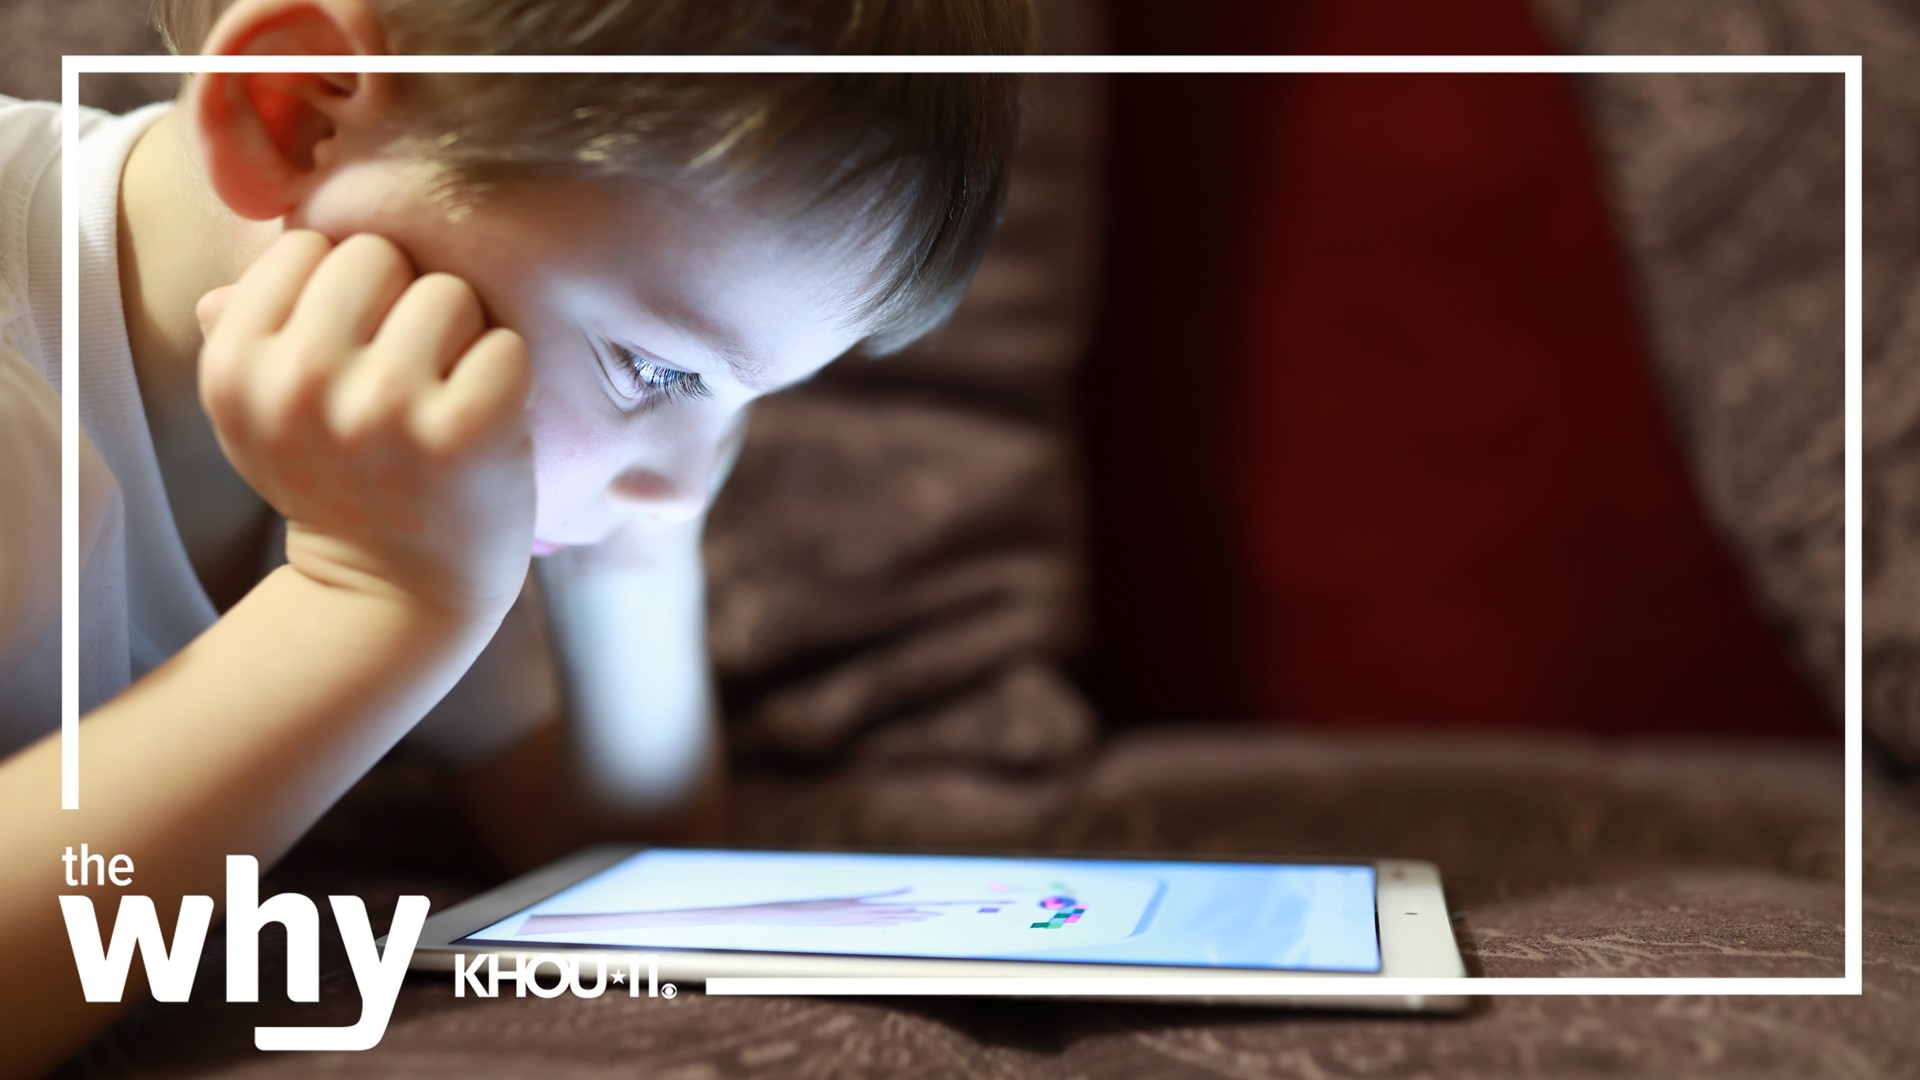 New research has some startling insight into what companies know about your child.